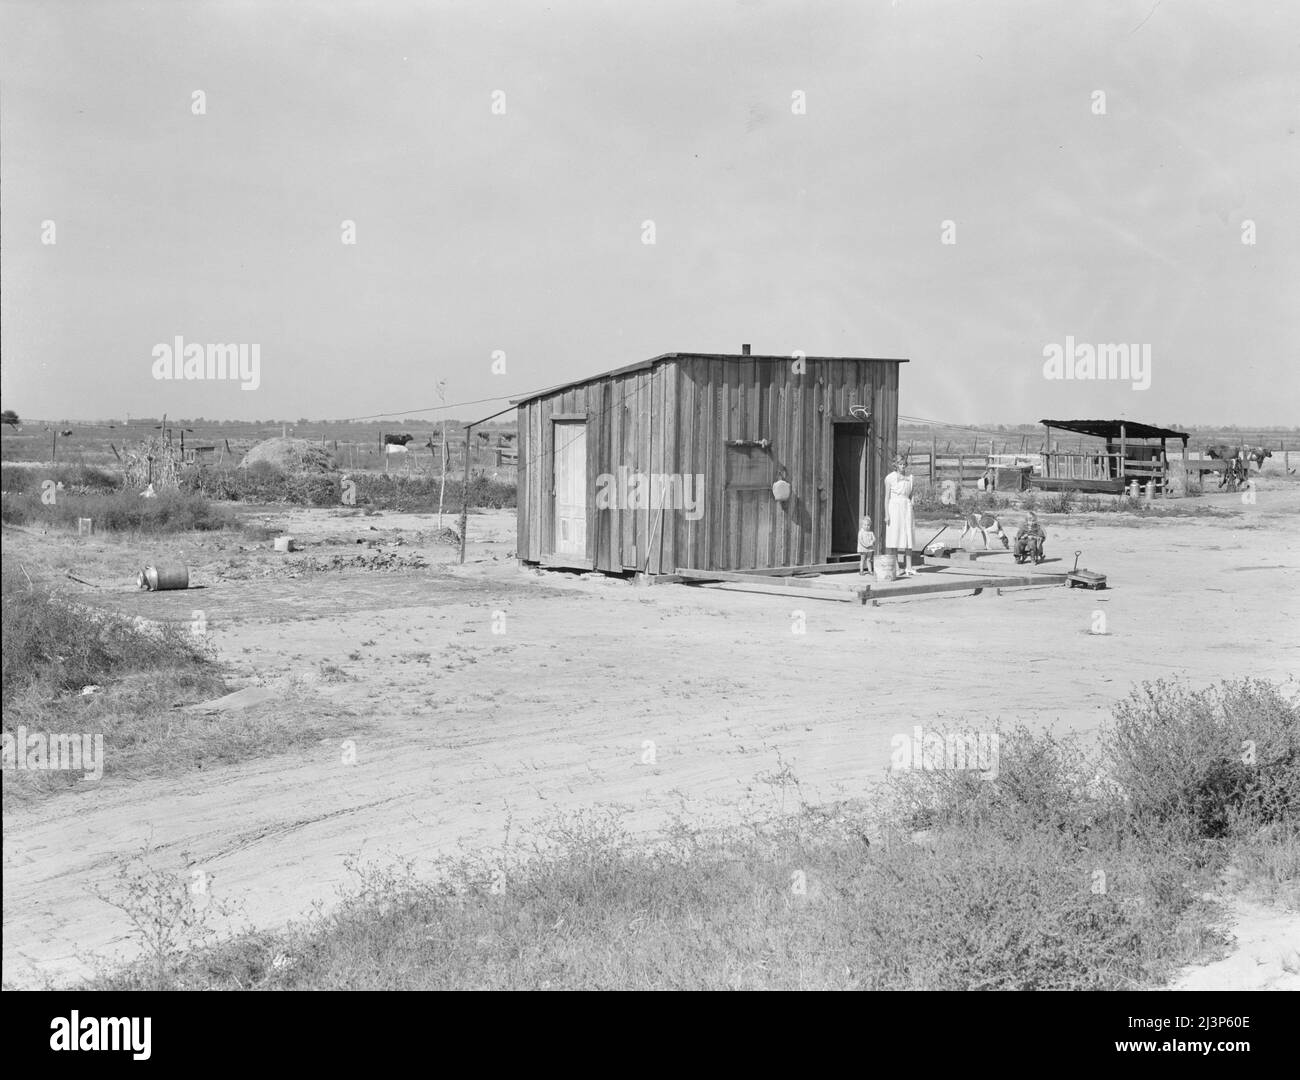 Home of rural rehabilitation client, Tulare County, California. They bought twenty acres of raw unimproved land with a first payment of fifty dollars which was money saved out of relief budget (August 1936). They received a Farm Security Administration (FSA) loan of seven hundred dollars for stock and equipment. Now they have a one-room shack, seven cows, three sows, and homemade pumping plant, along with ten acres of improved permanent pasture. Cream check approximately thirty dollars per month. Husband also works about ten days a month outside the farm. Husband is twenty-six years old, wife Stock Photo